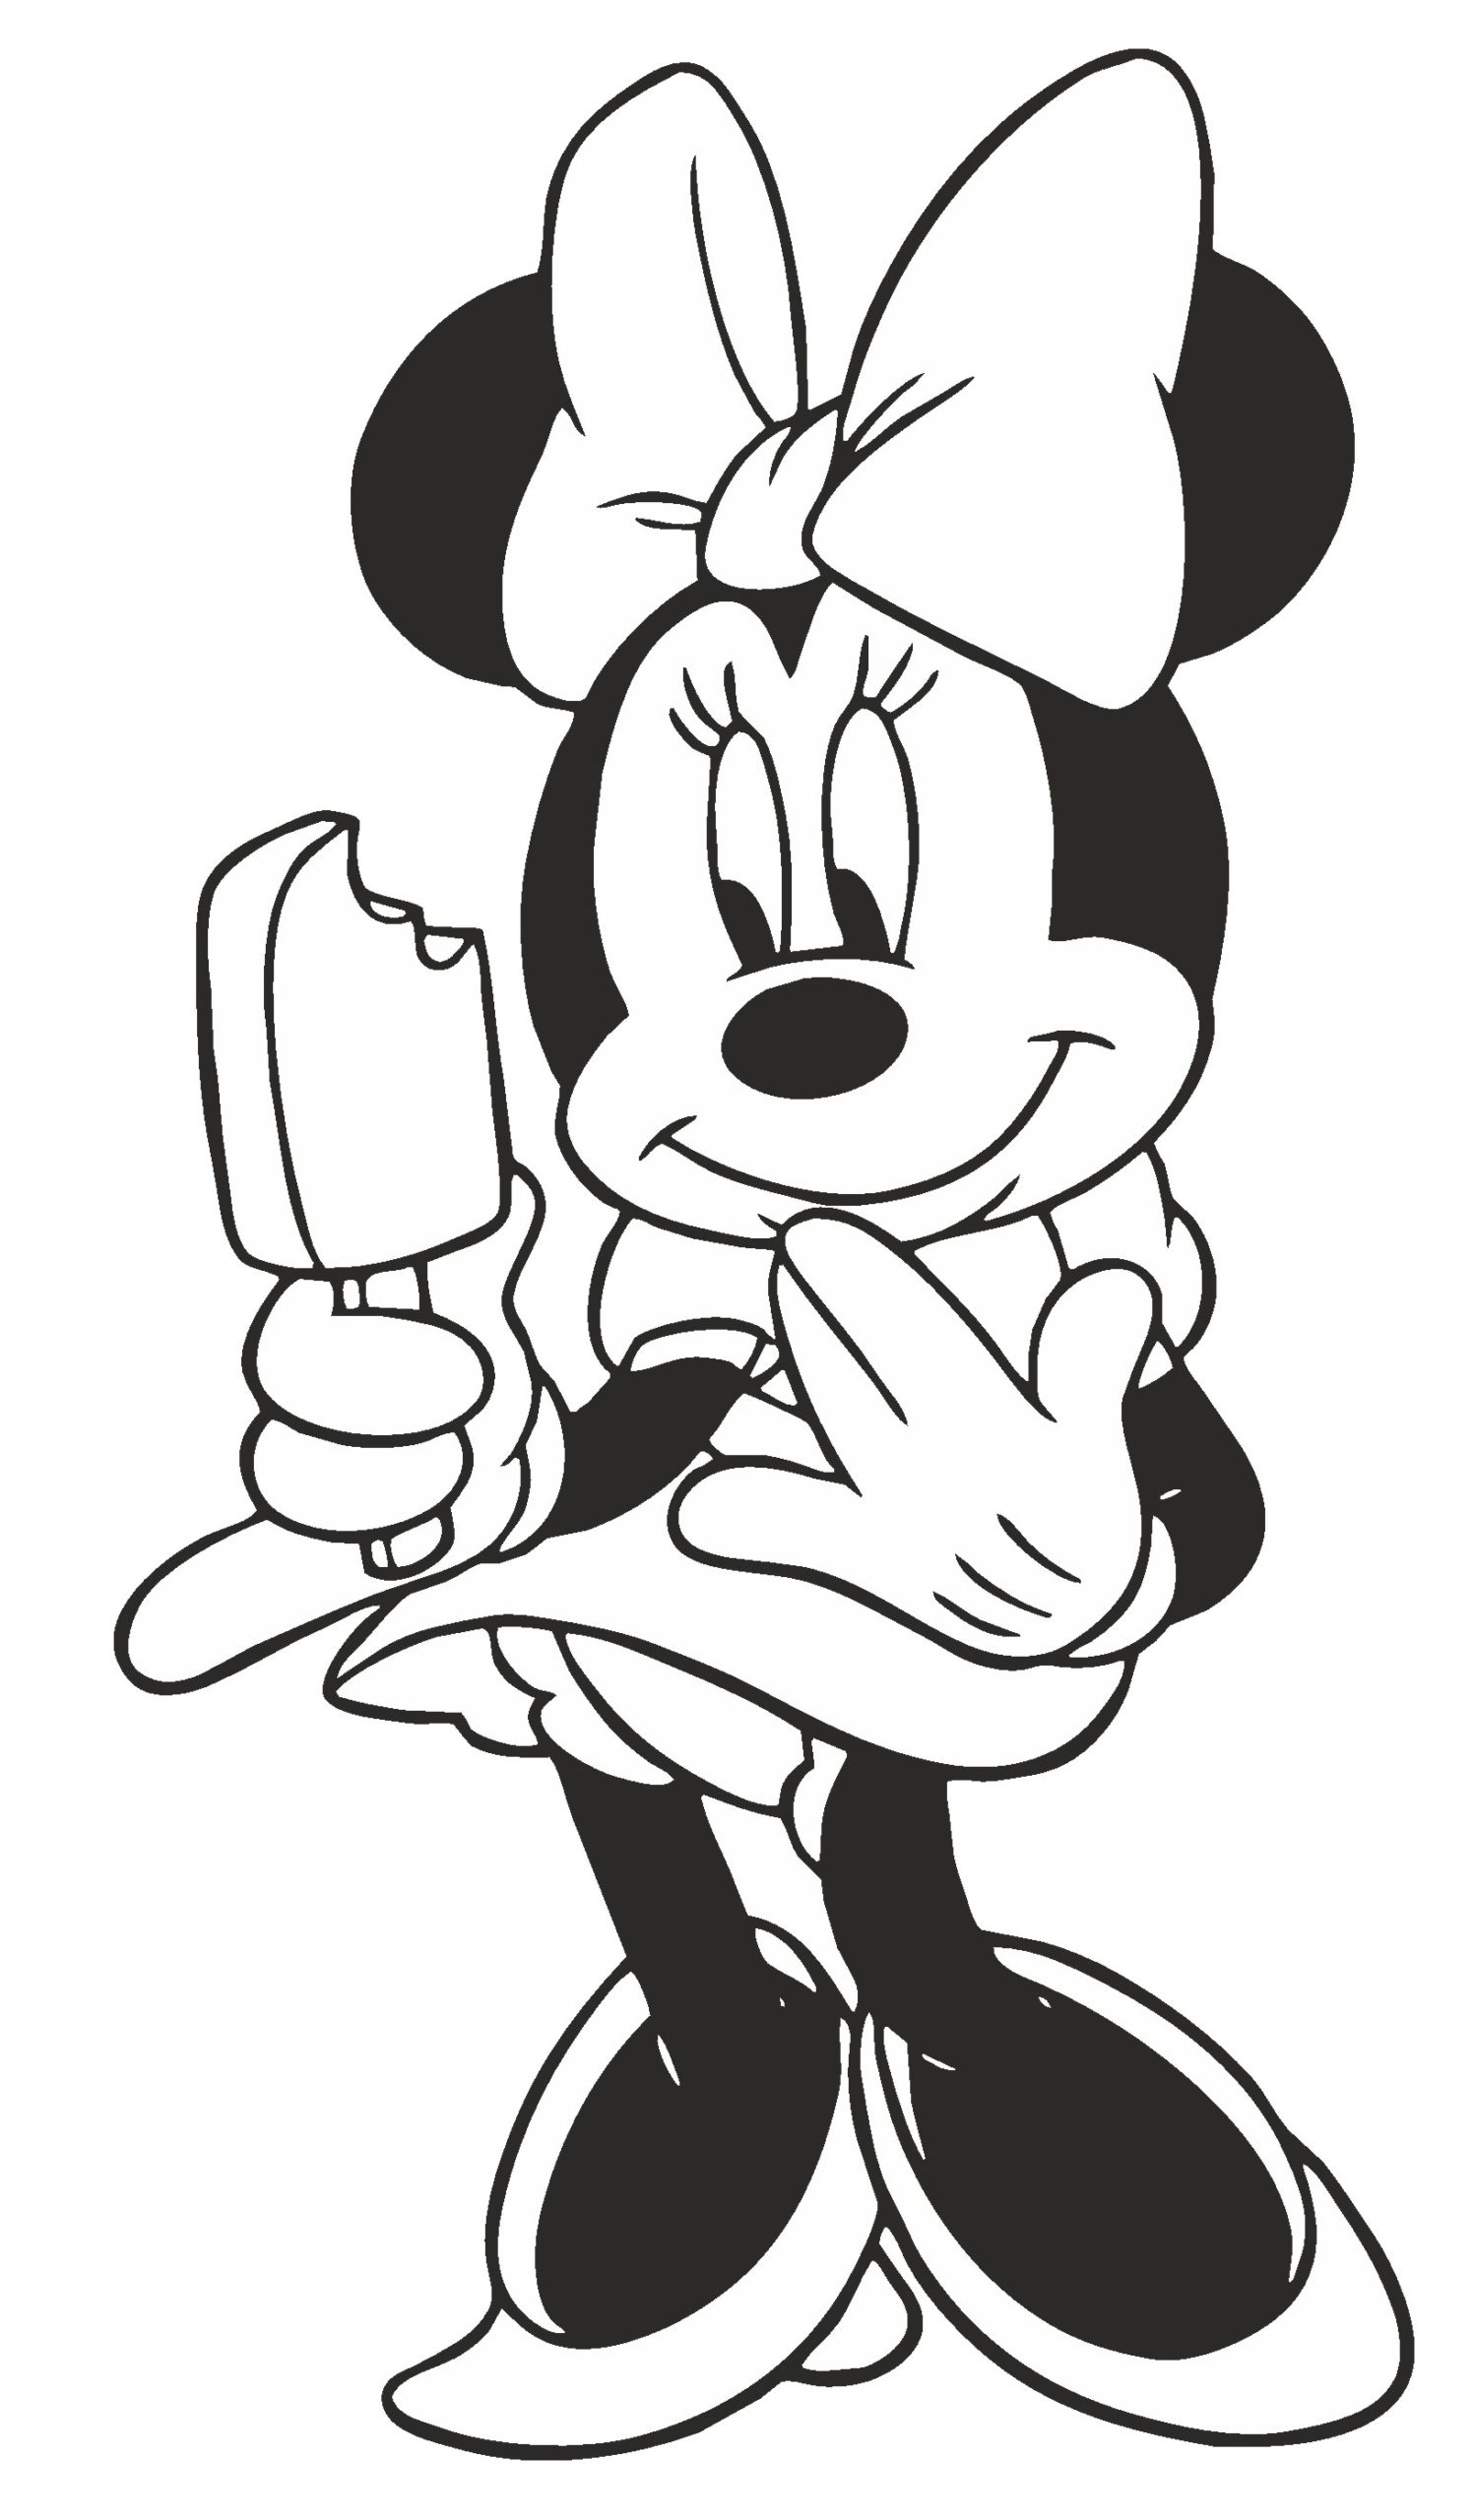 eating ice cream coloring page